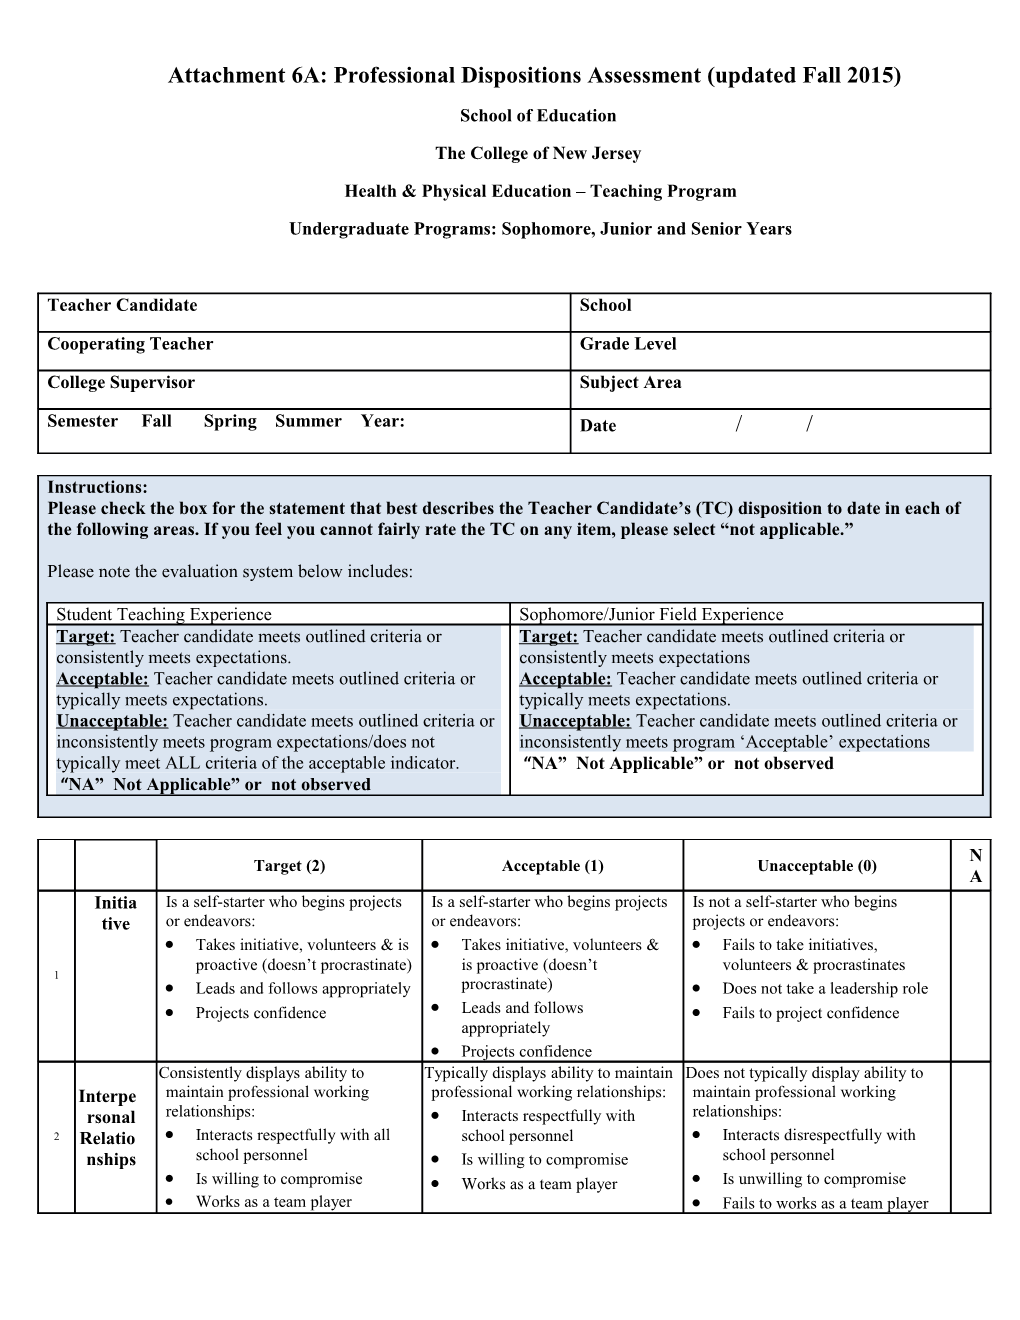 Attachment 6A: Professional Dispositions Assessment (Updated Fall 2015)